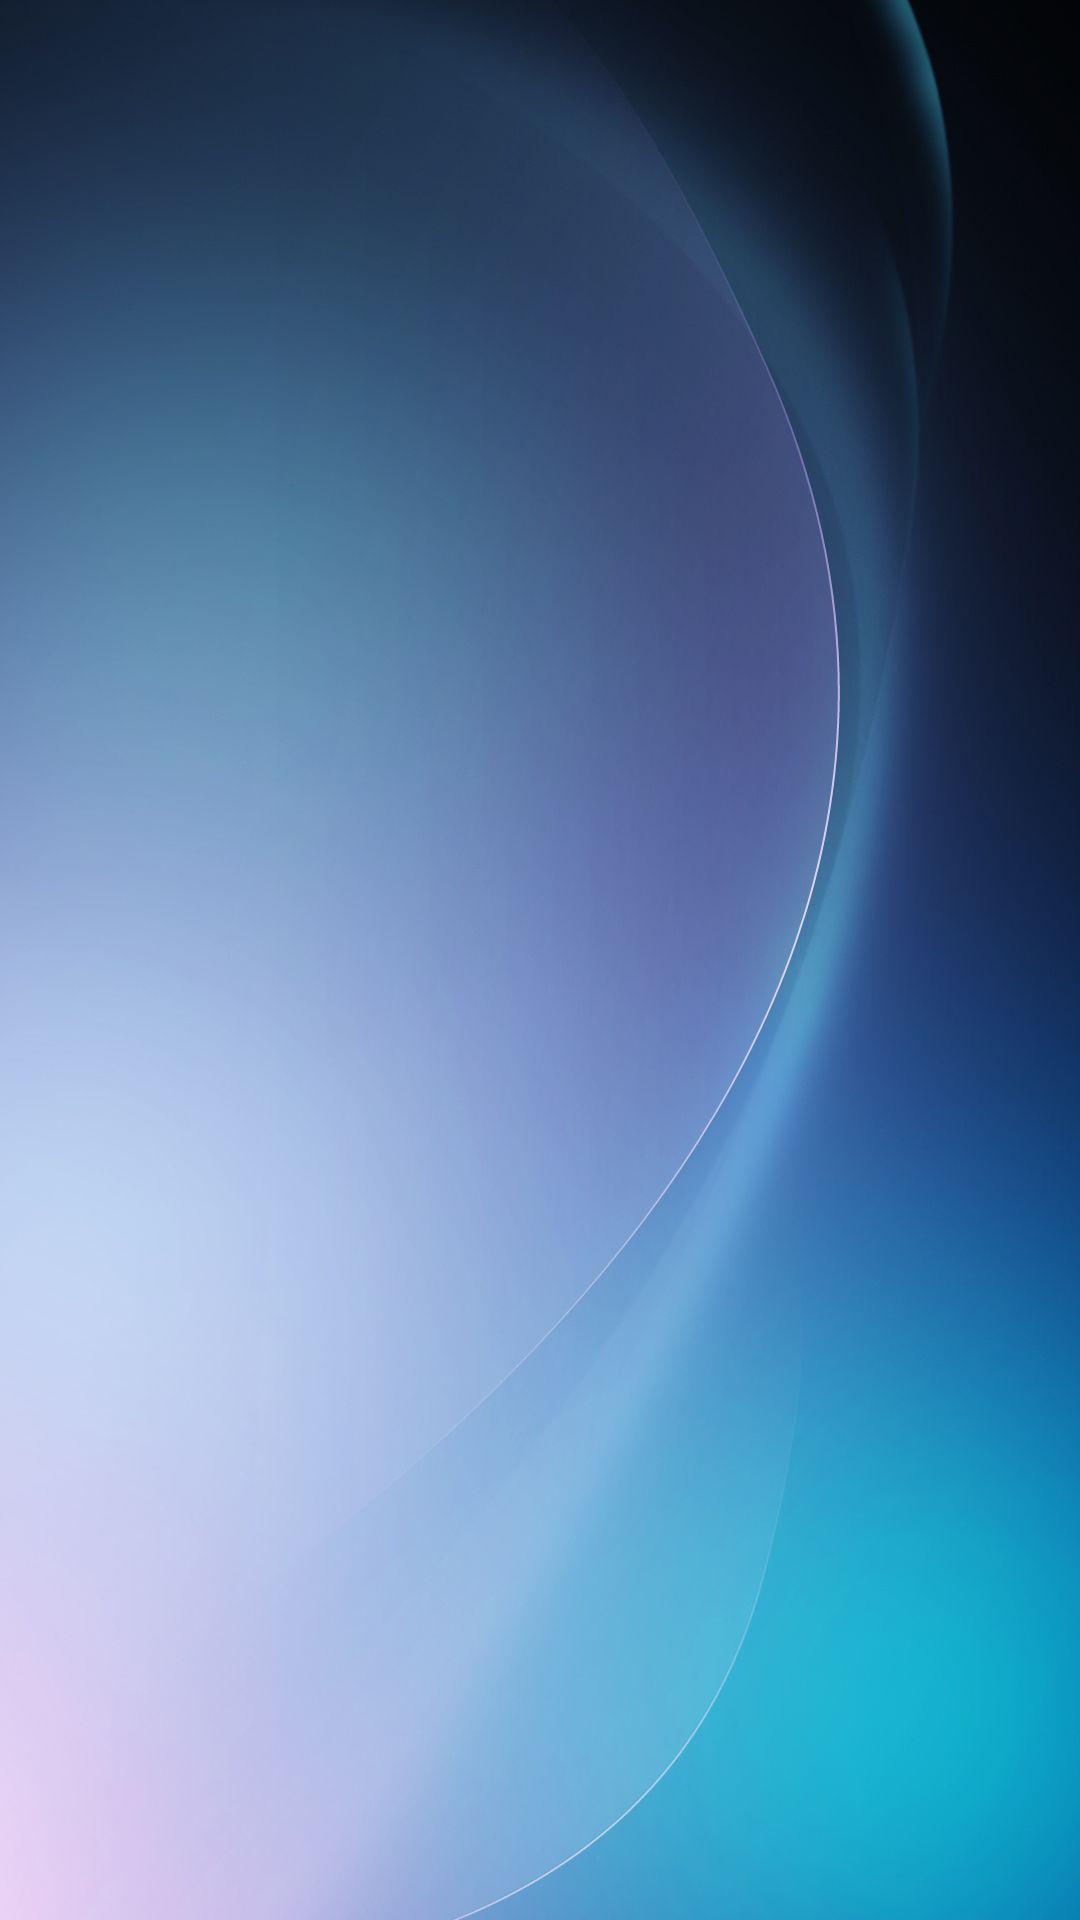 Abstract Blue Wave Android Wallpaper. wallpaper crush